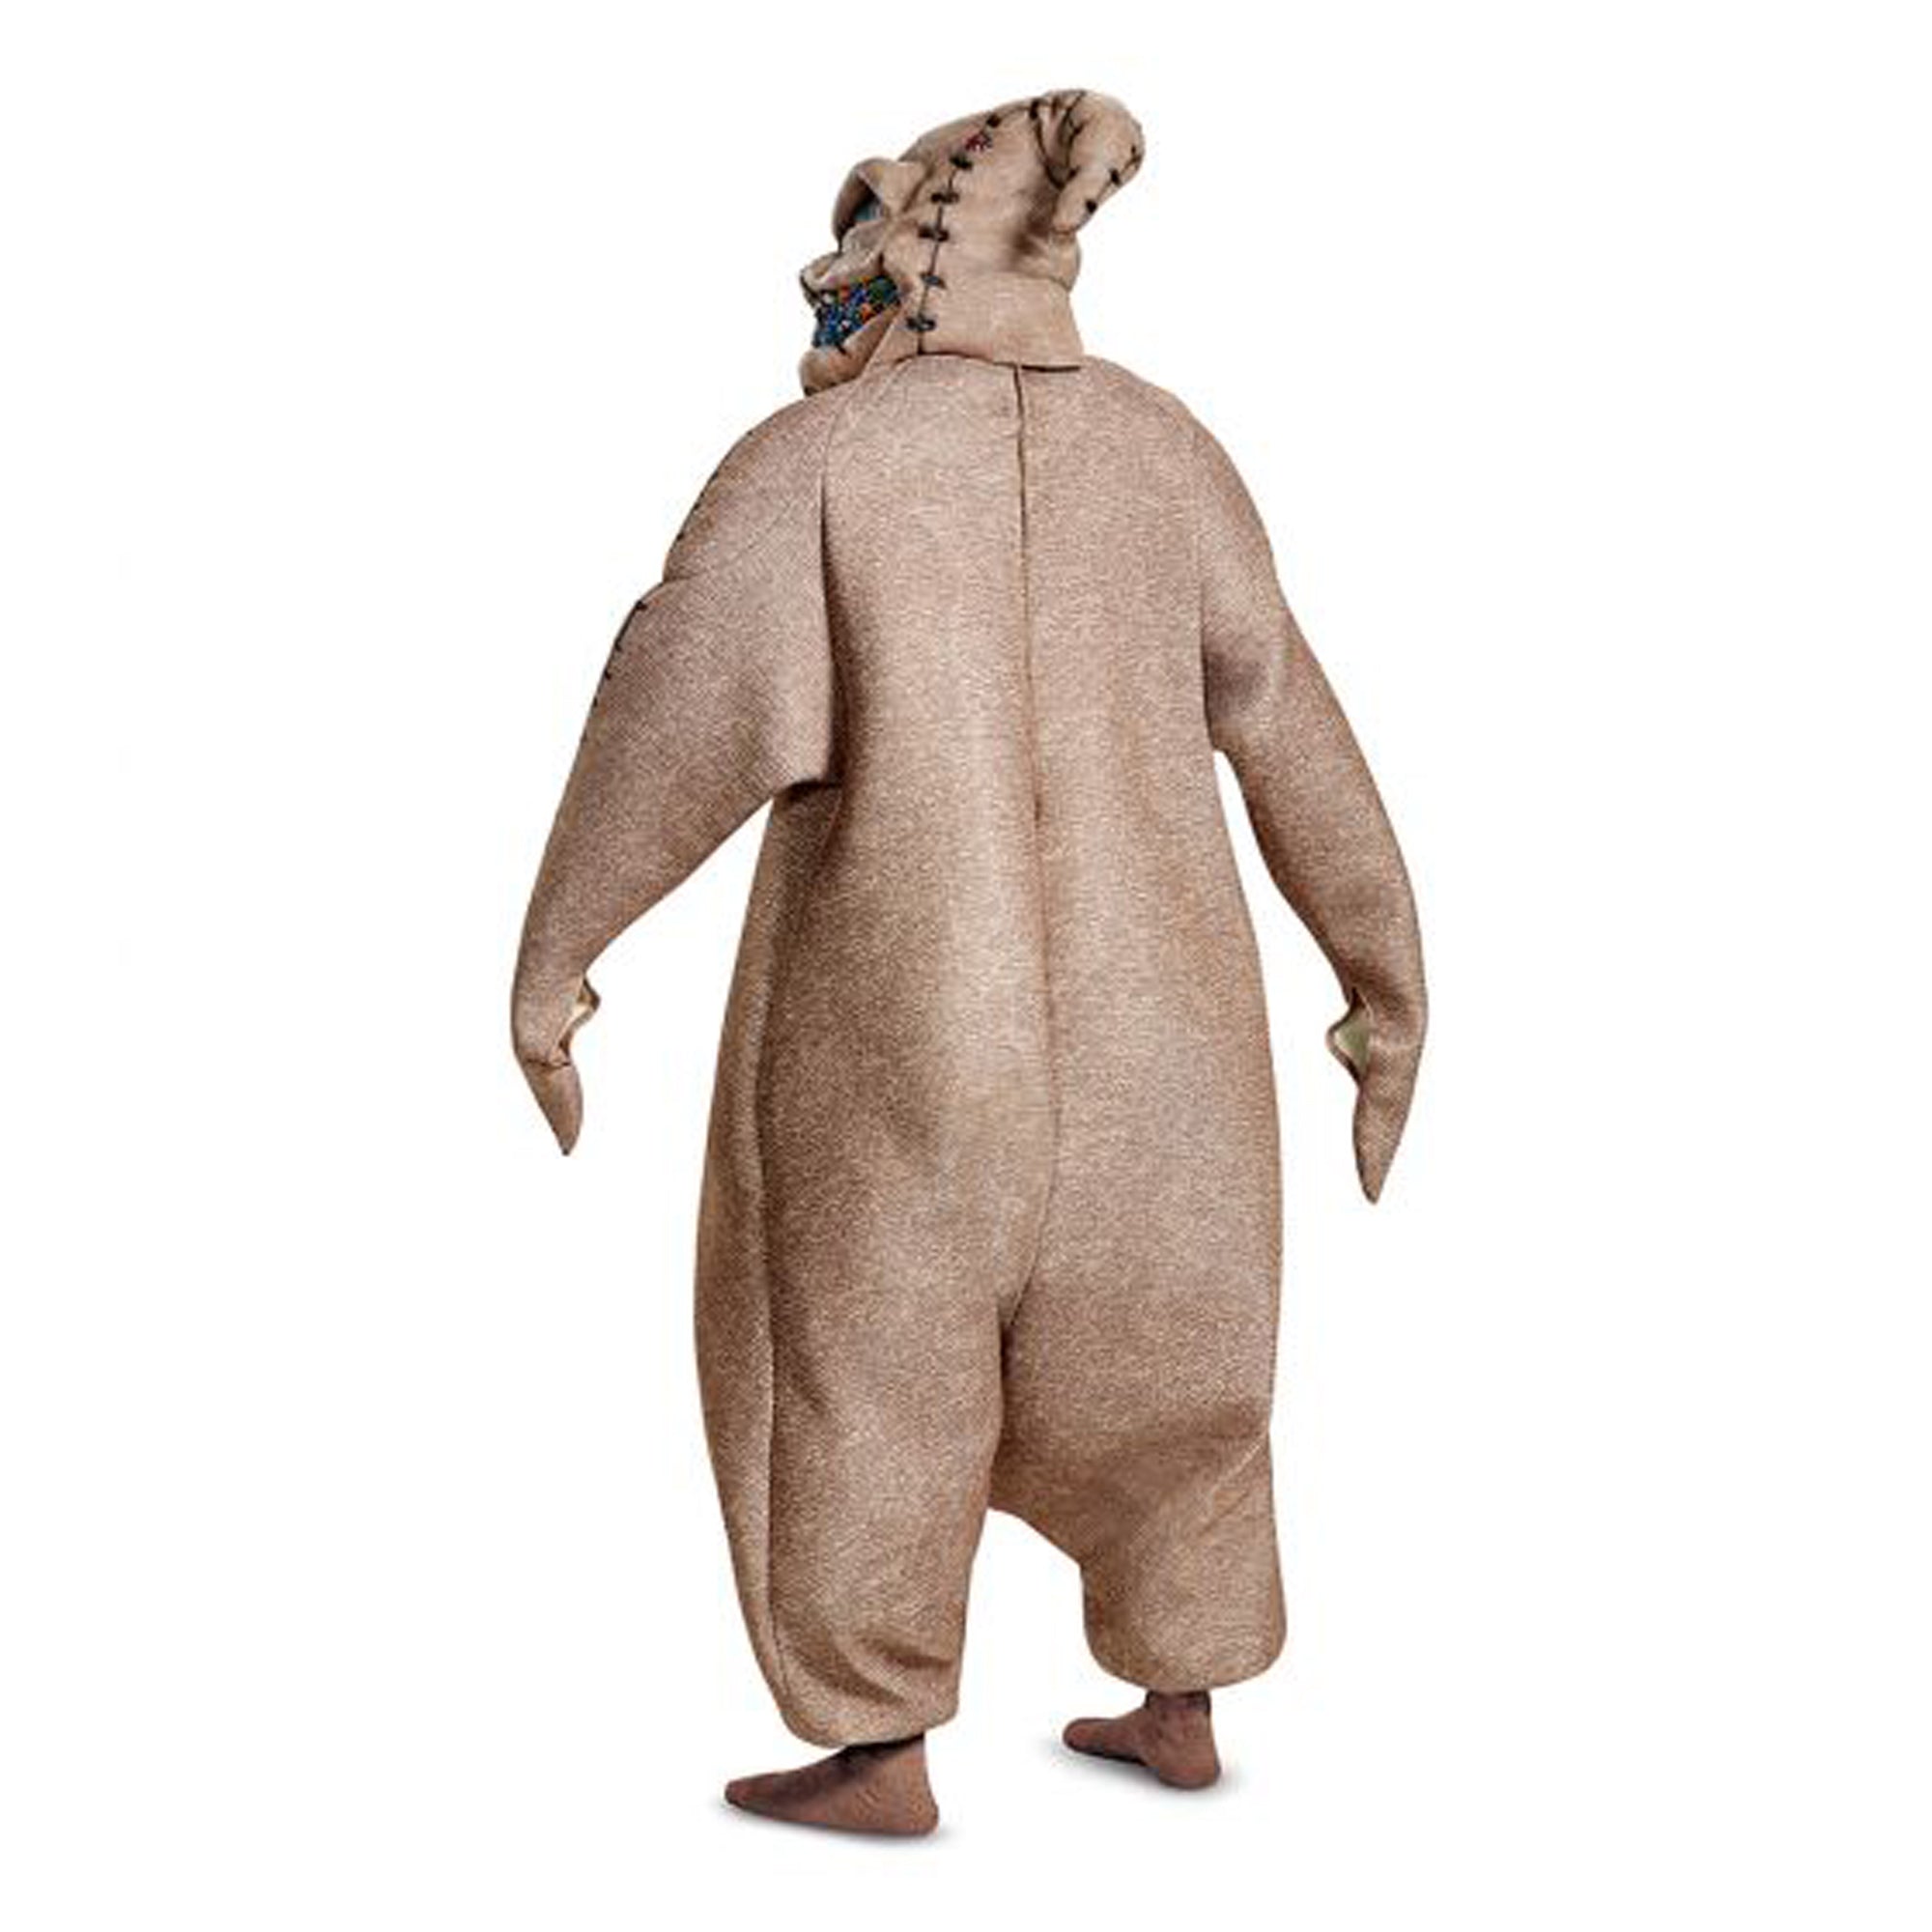 Oogie Boogie Prestige Costume for Adults